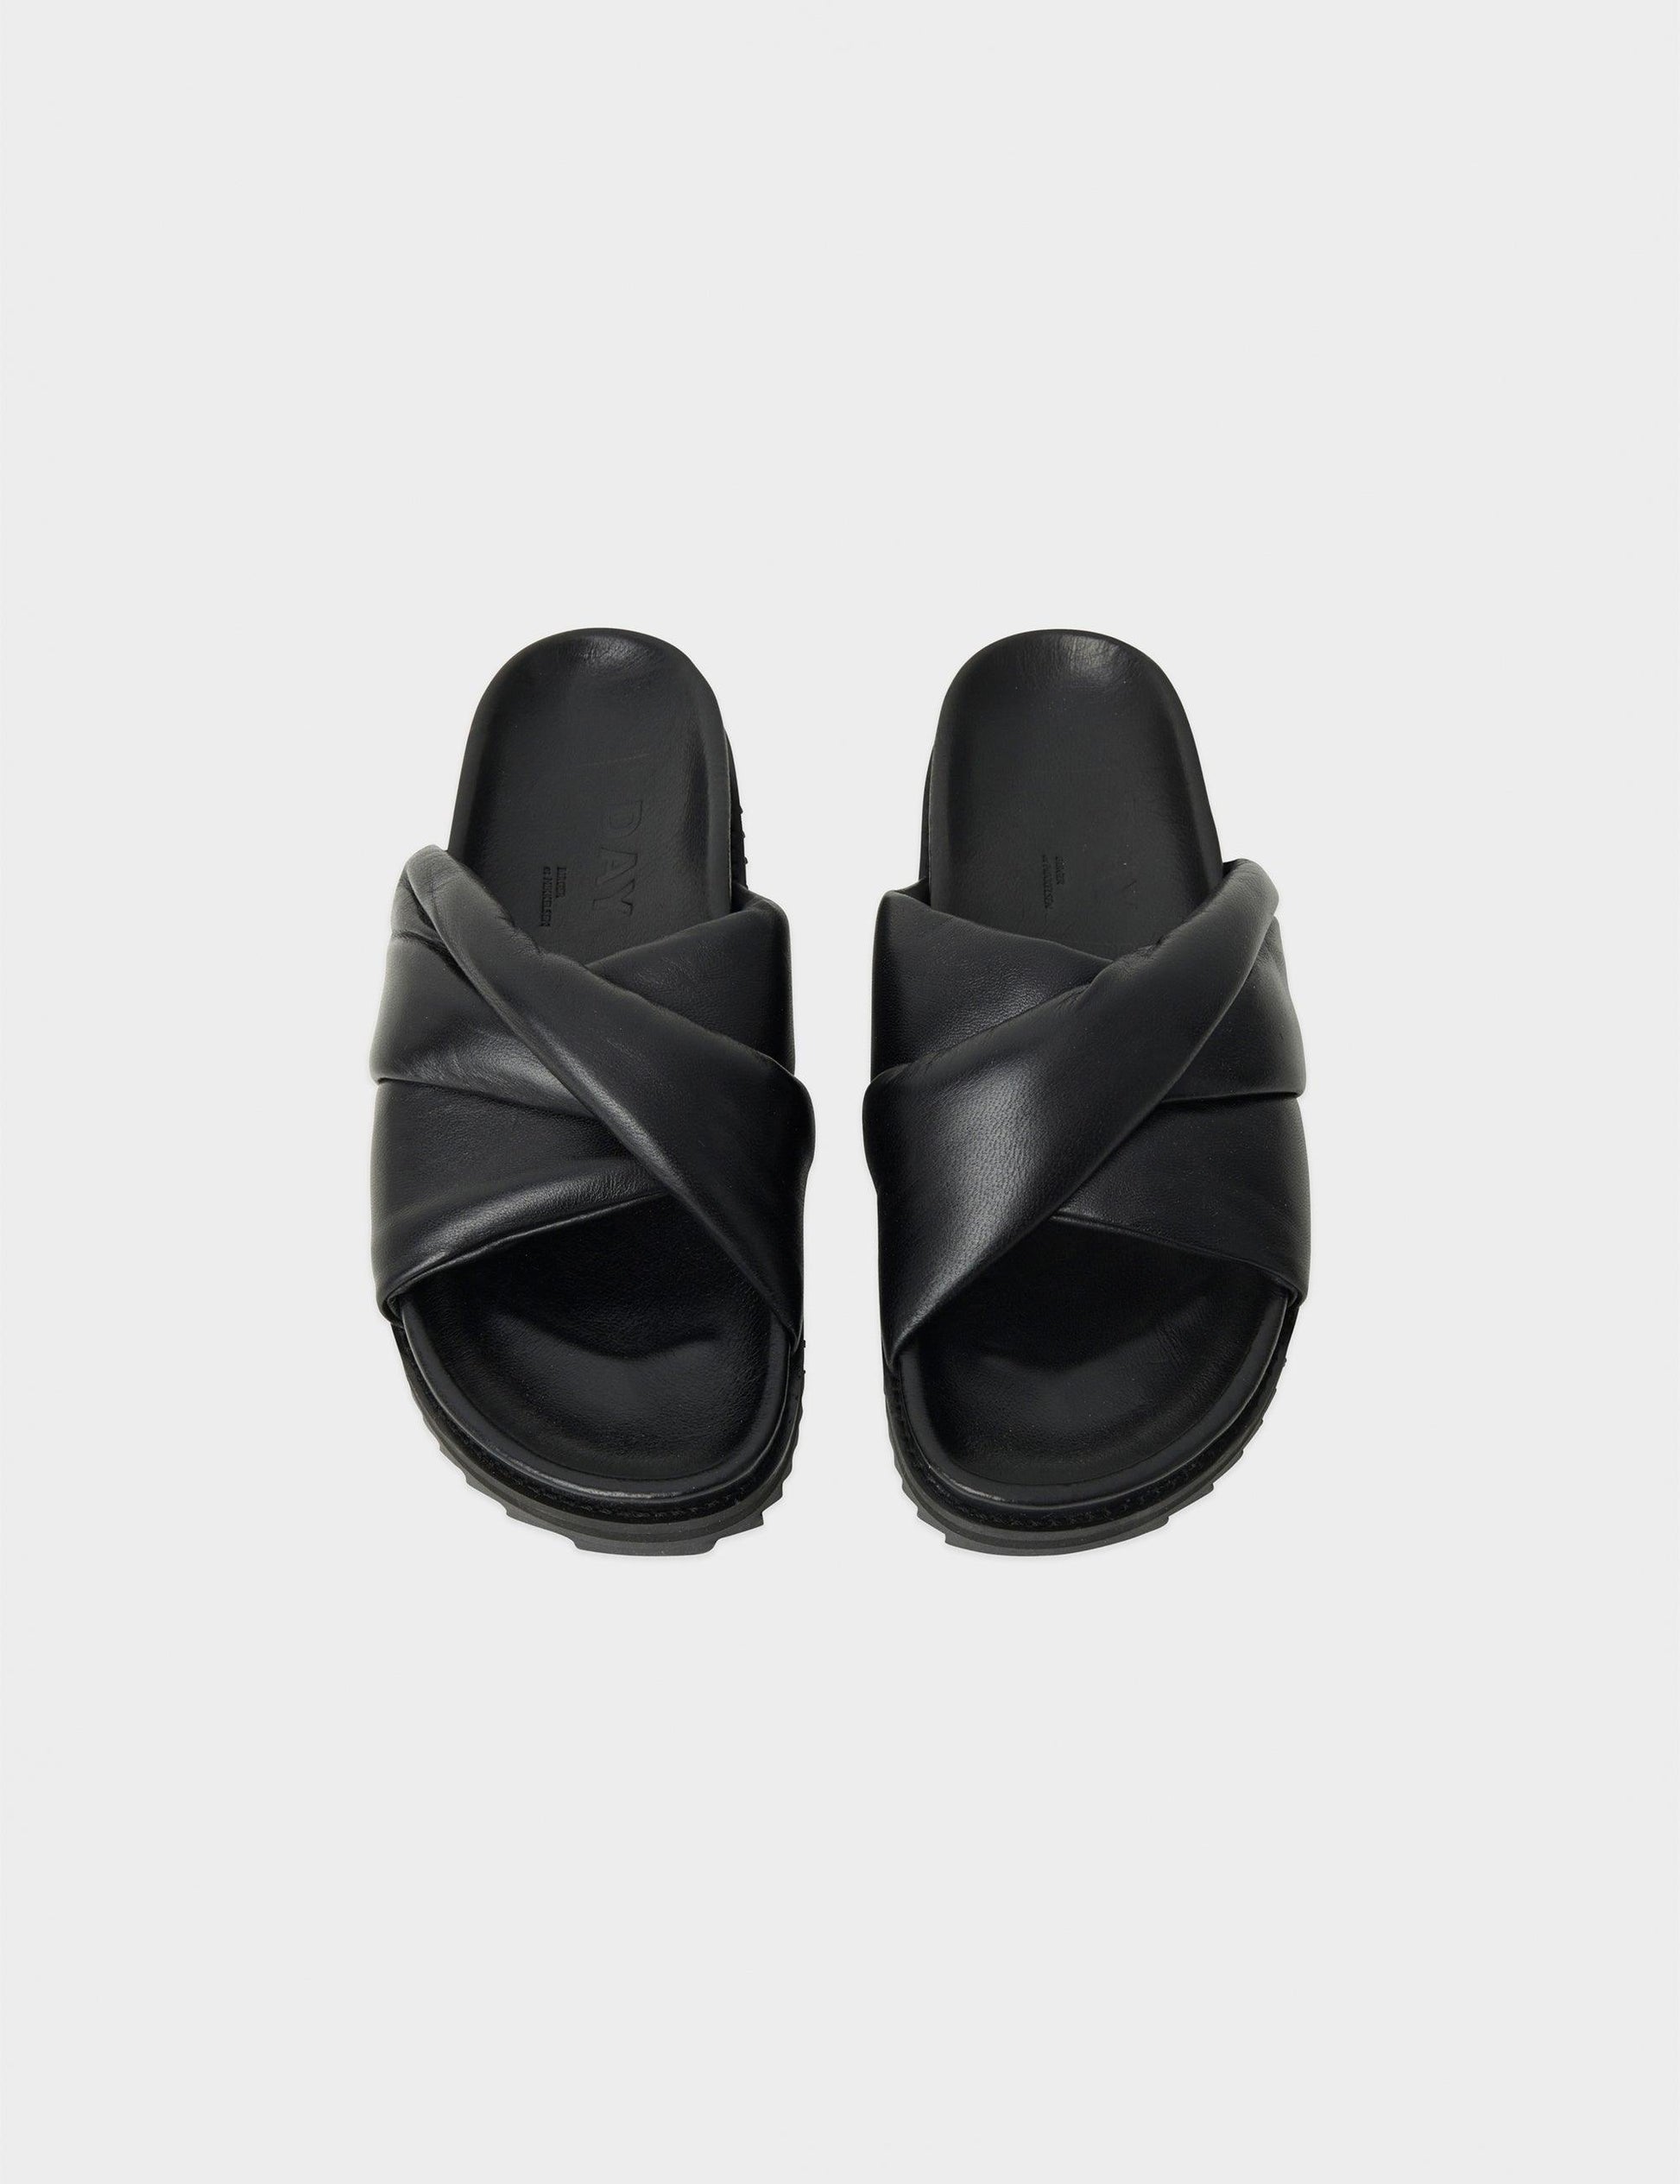 DAY BIRGER - Nairobi Black Leather Padded Twist  Sandals - 32 The Guild 